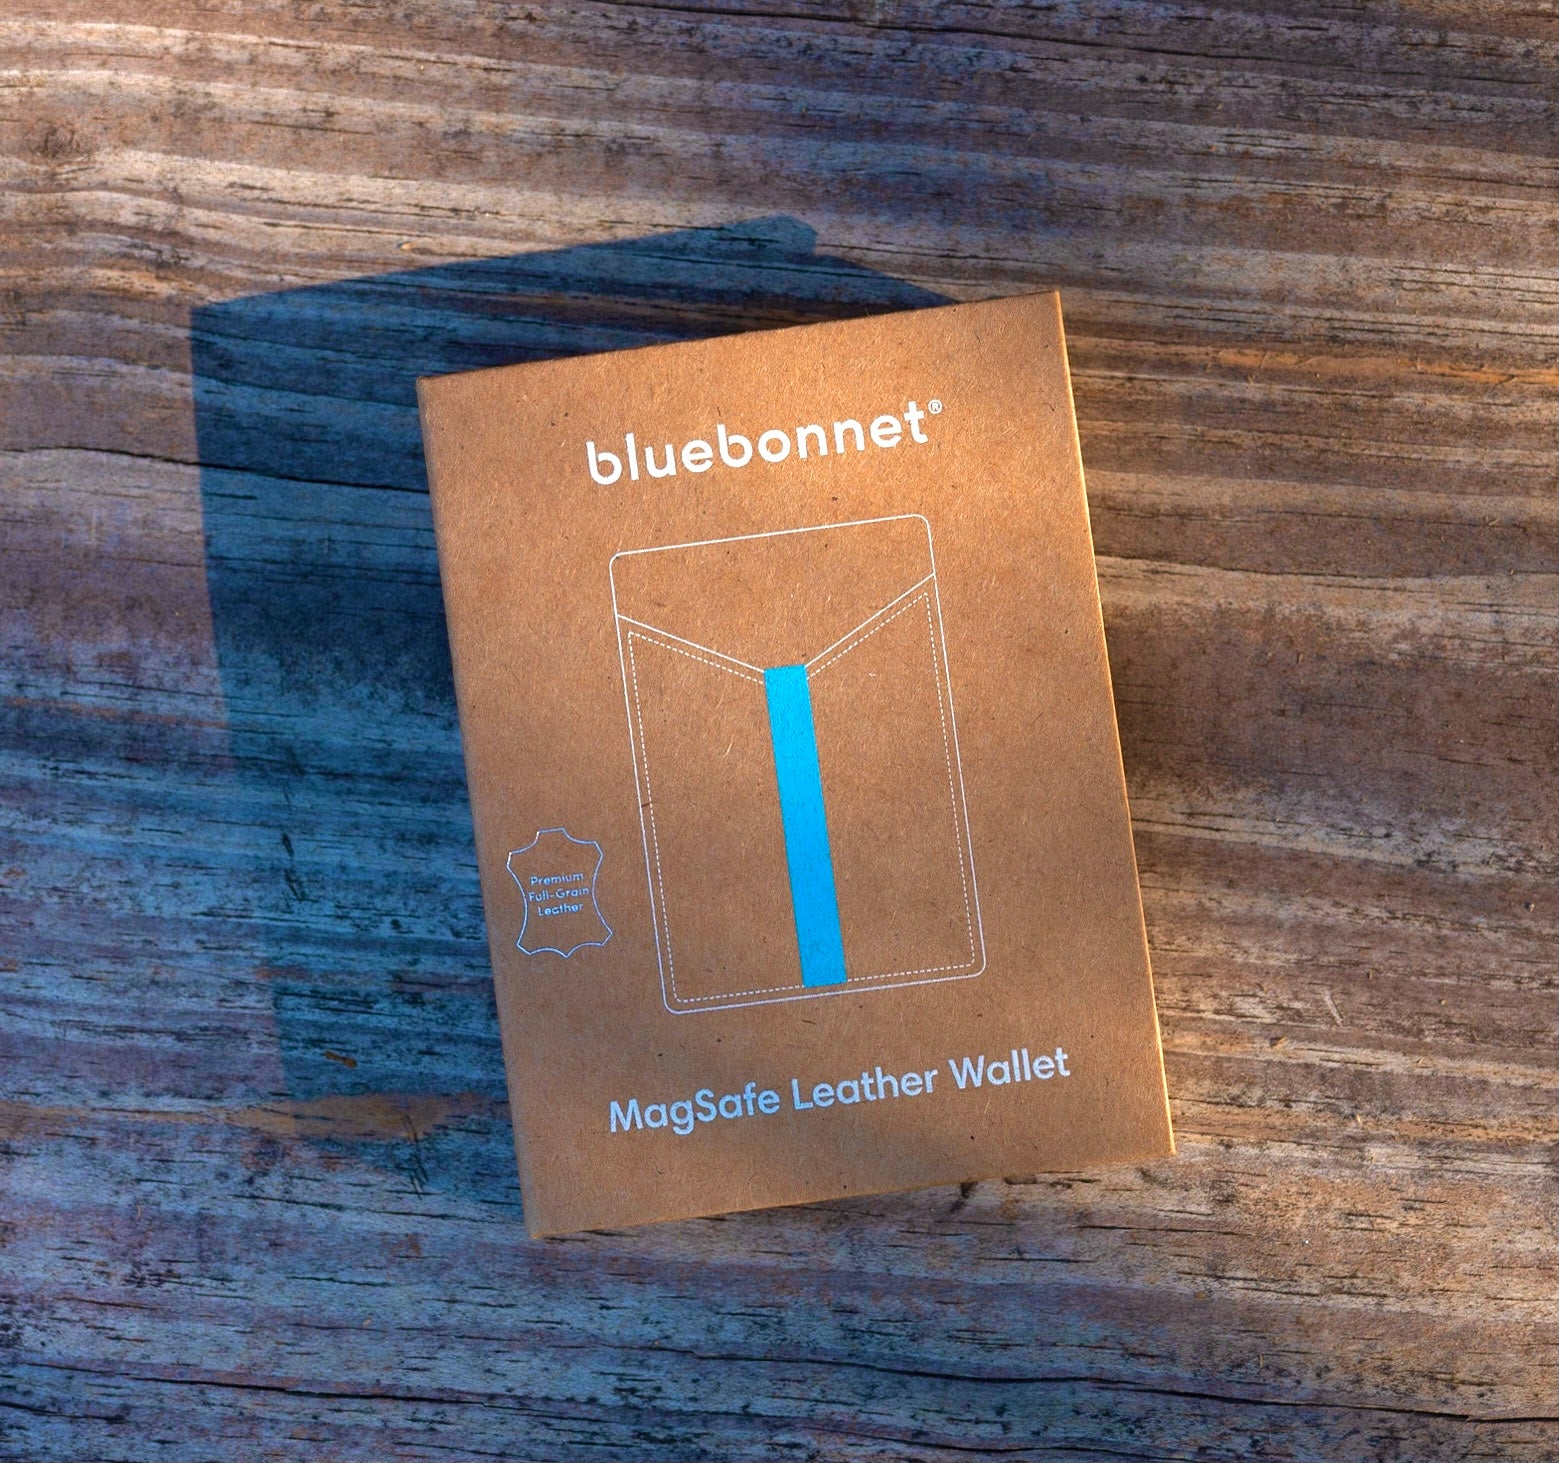 Bluebonnet Magsafe Leather wallet in a box